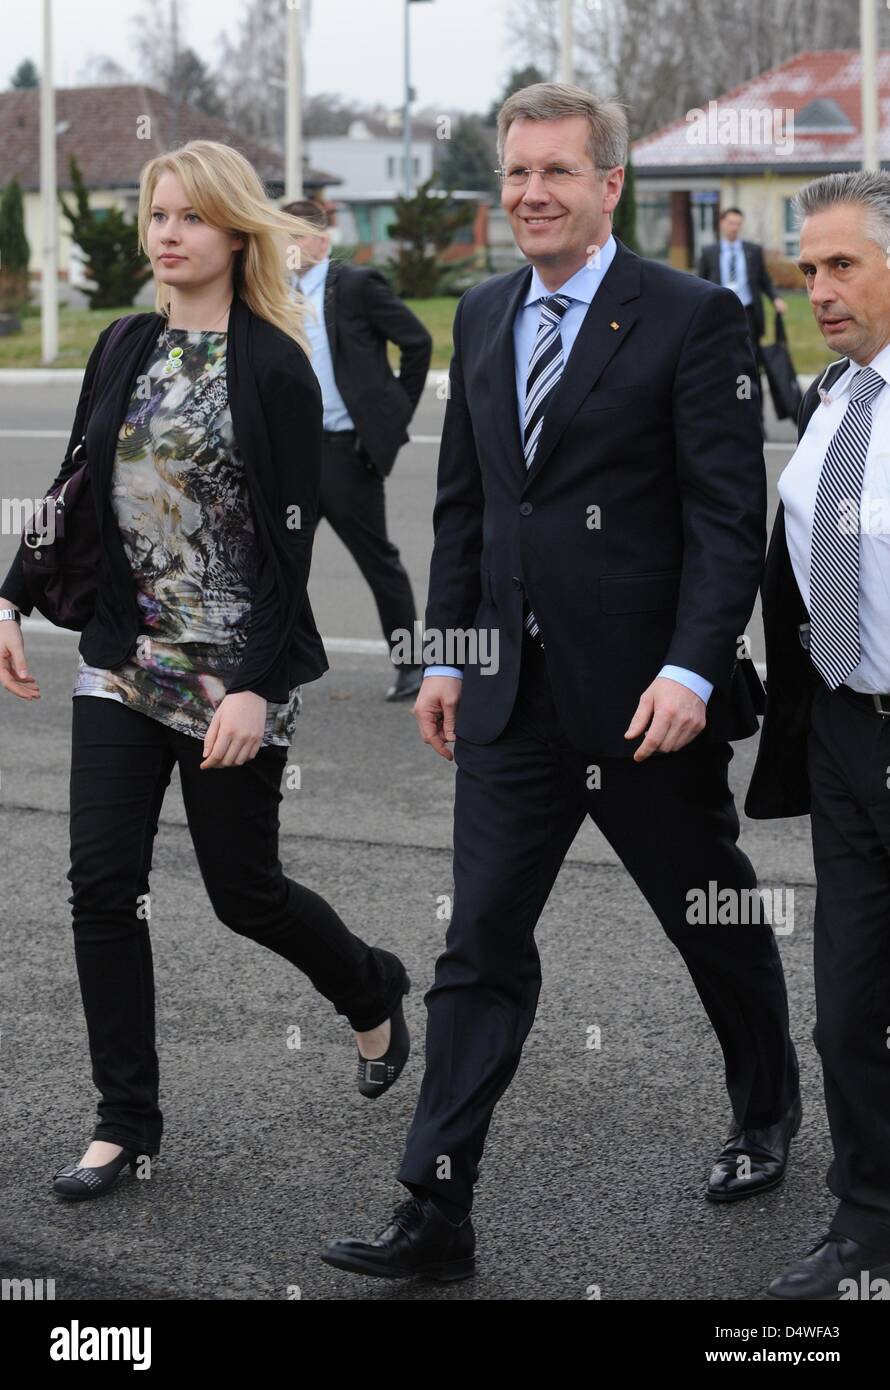 German President Wulff and his daughter Annalena walk to their plane to Israel at Tegel Airport in Berlin, Germany, 27 November 2010. Annalena Wulff will take the place of Wulff's wife Bettina during the 4-day state visit. Photo: Rainer Jensen Stock Photo